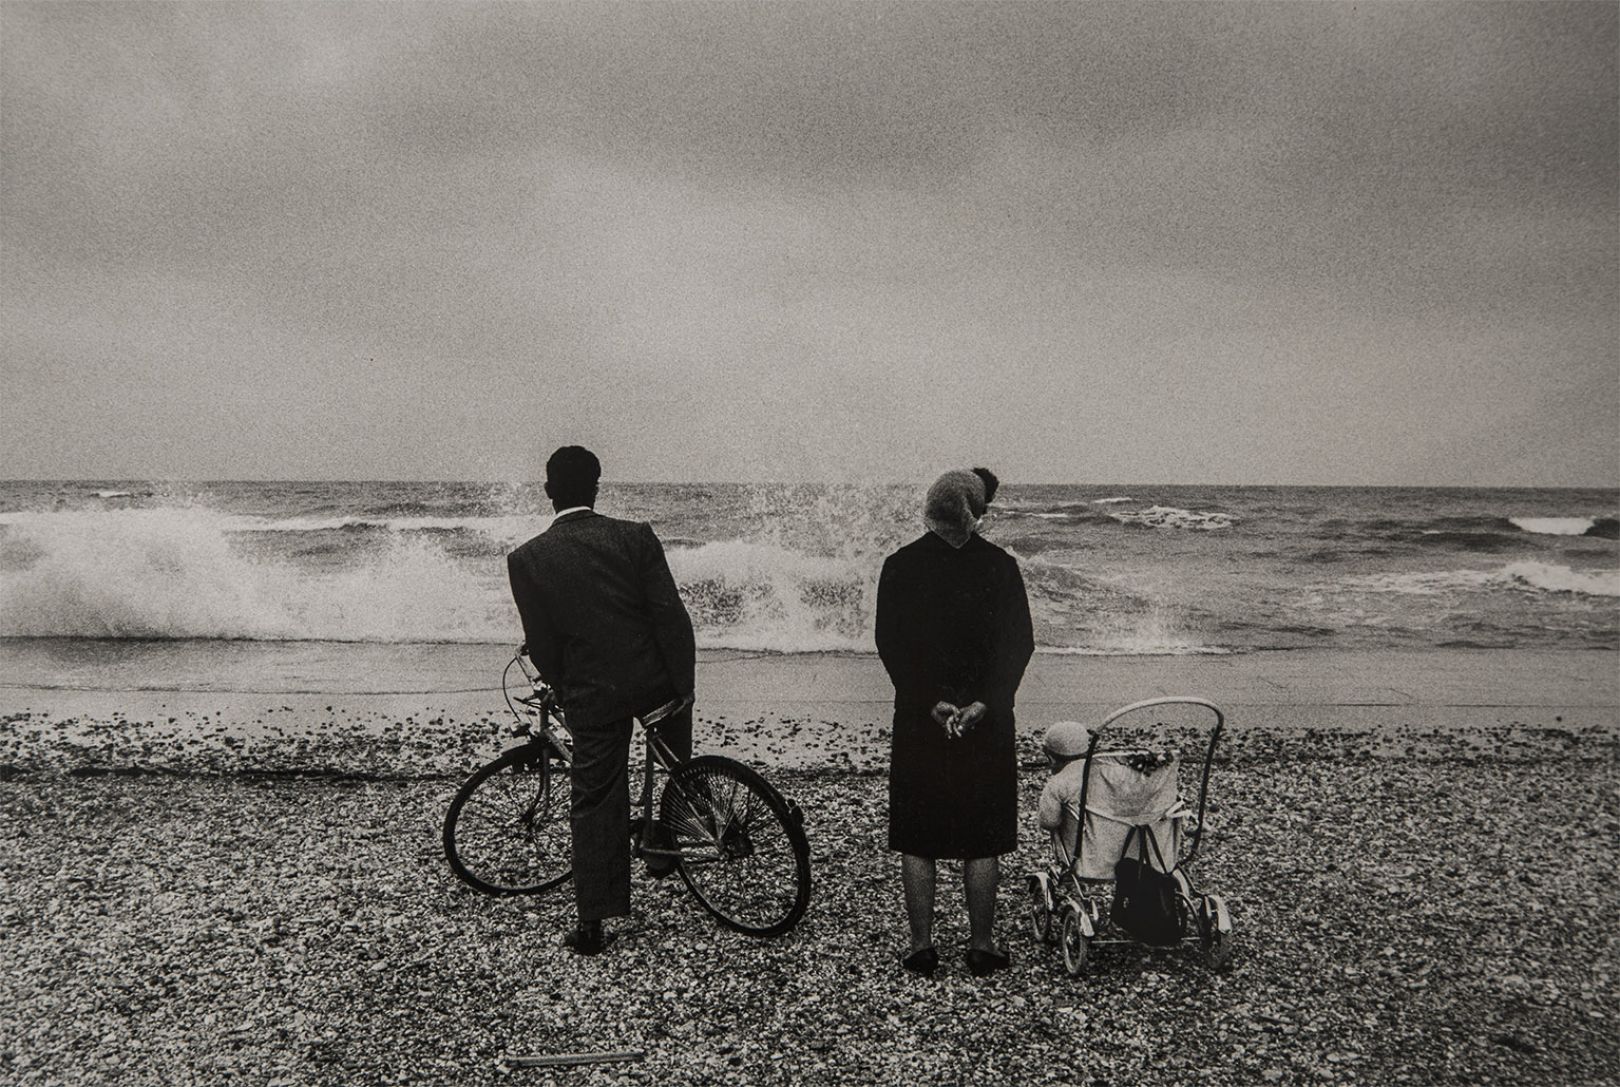 The Italians: Works by Gianni Berengo Gardin, Italy’s most celebrated ...